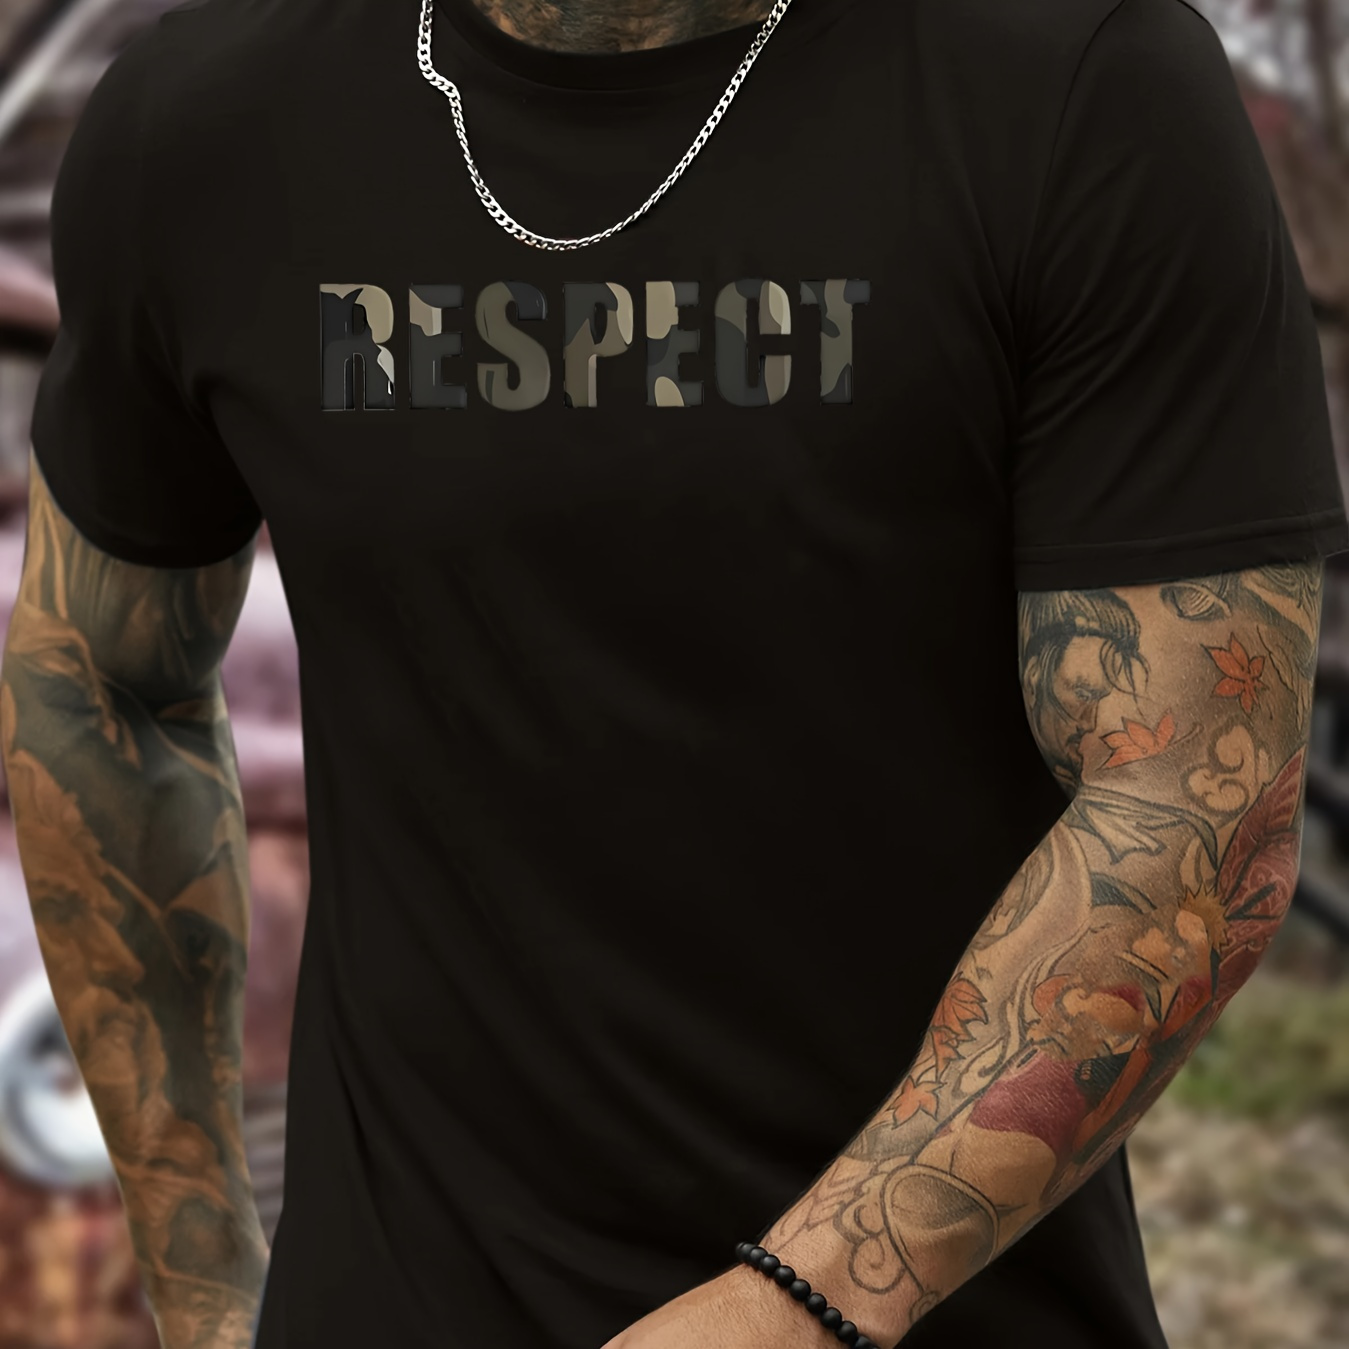 

Fashion Round Neck Tees For Men, "respect"trendy Print Stylish Short Sleeves, Summer Causal Tops For Everyday Wear